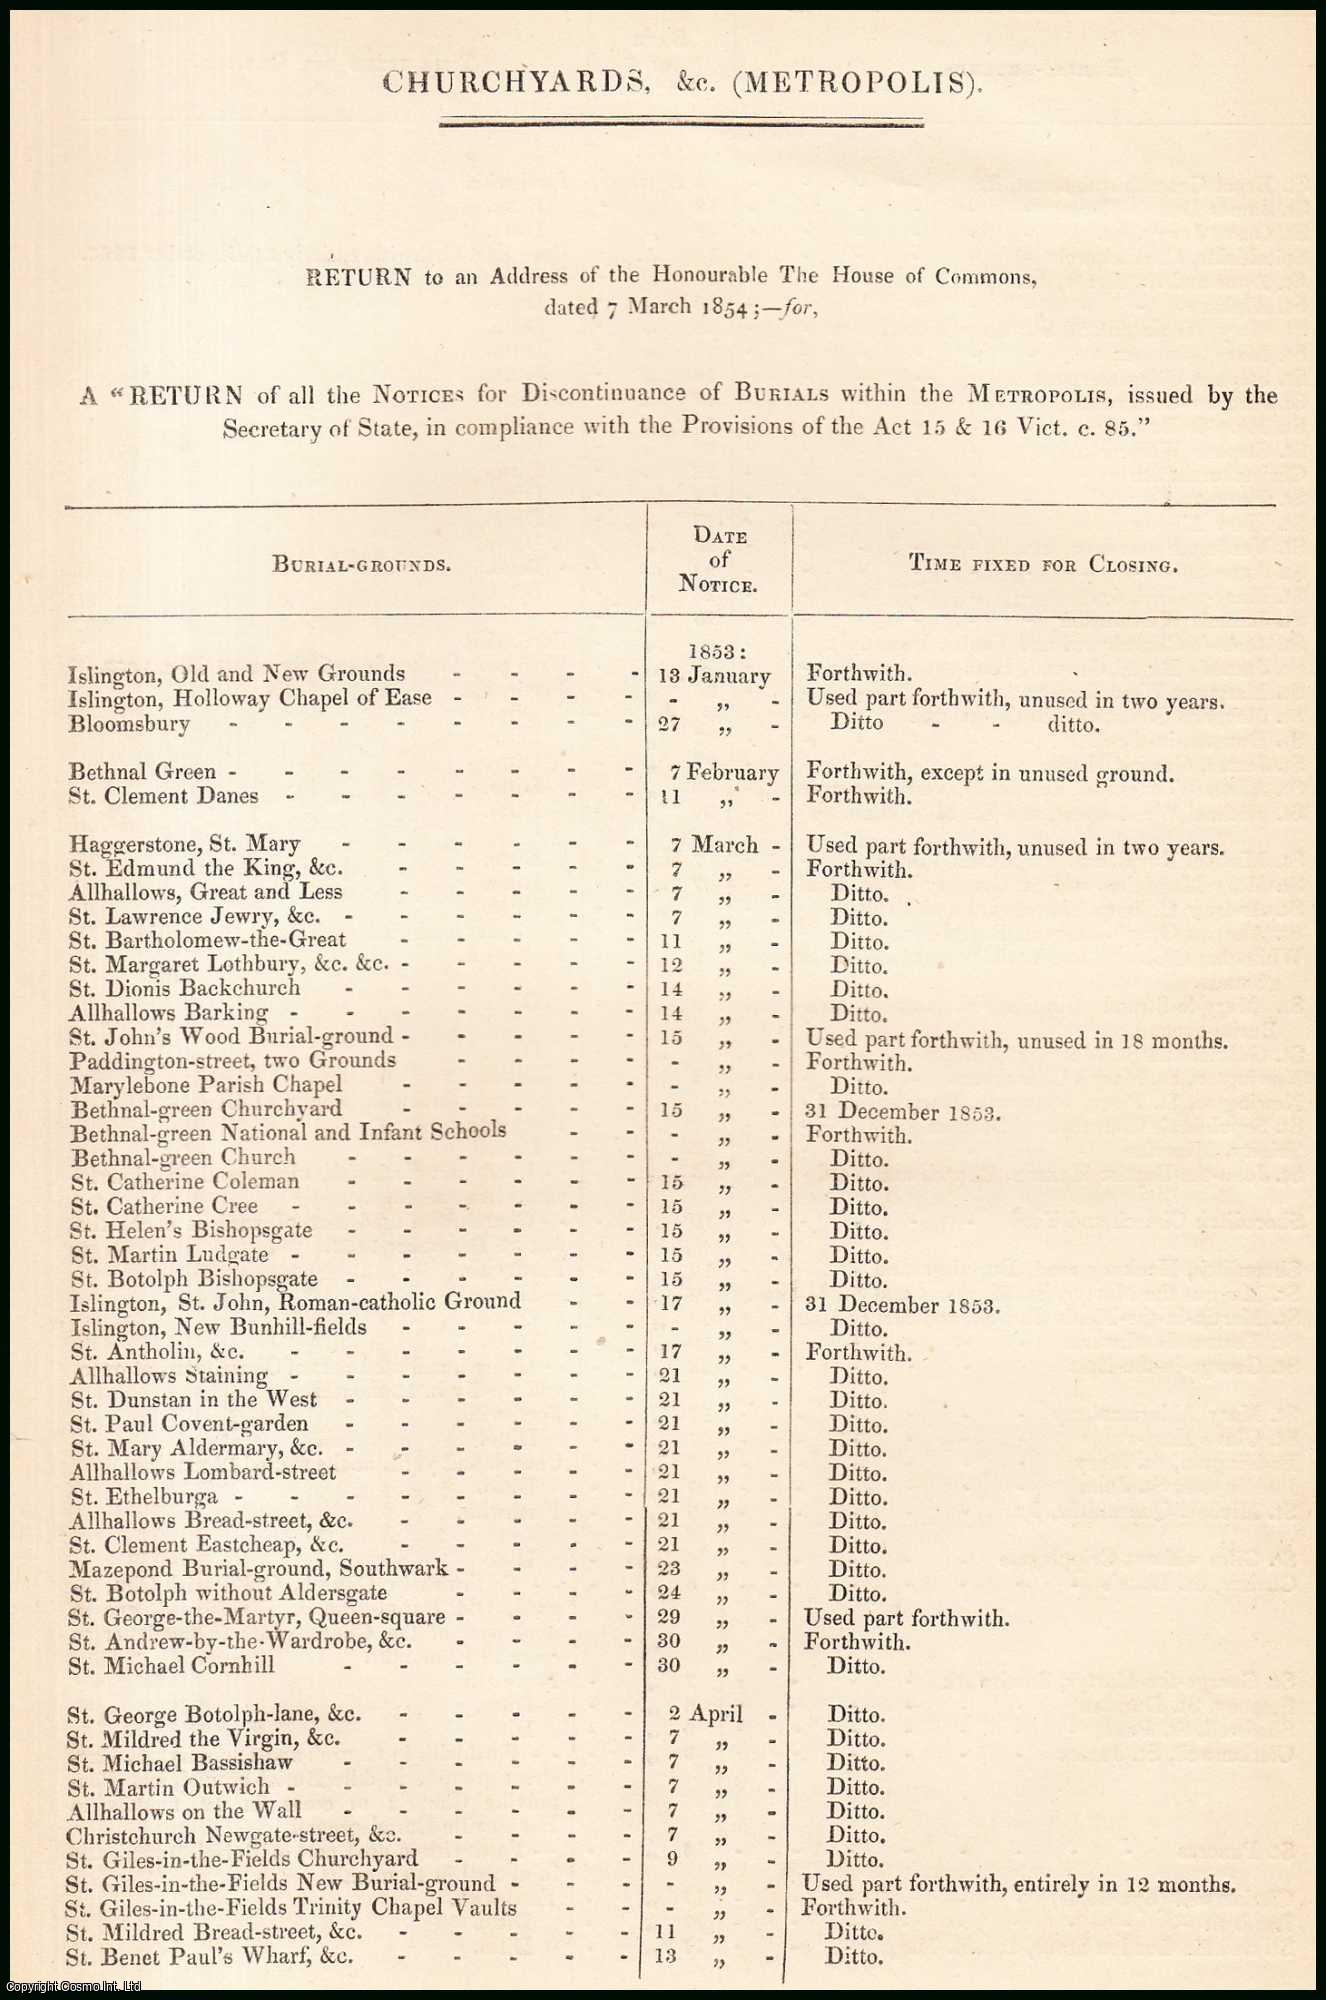 Fitzroy, Henry - [Blue Book Report]. Churchyards (Metropolis); Return of all Notices for Discontinuance of Burials within the Metropolis.